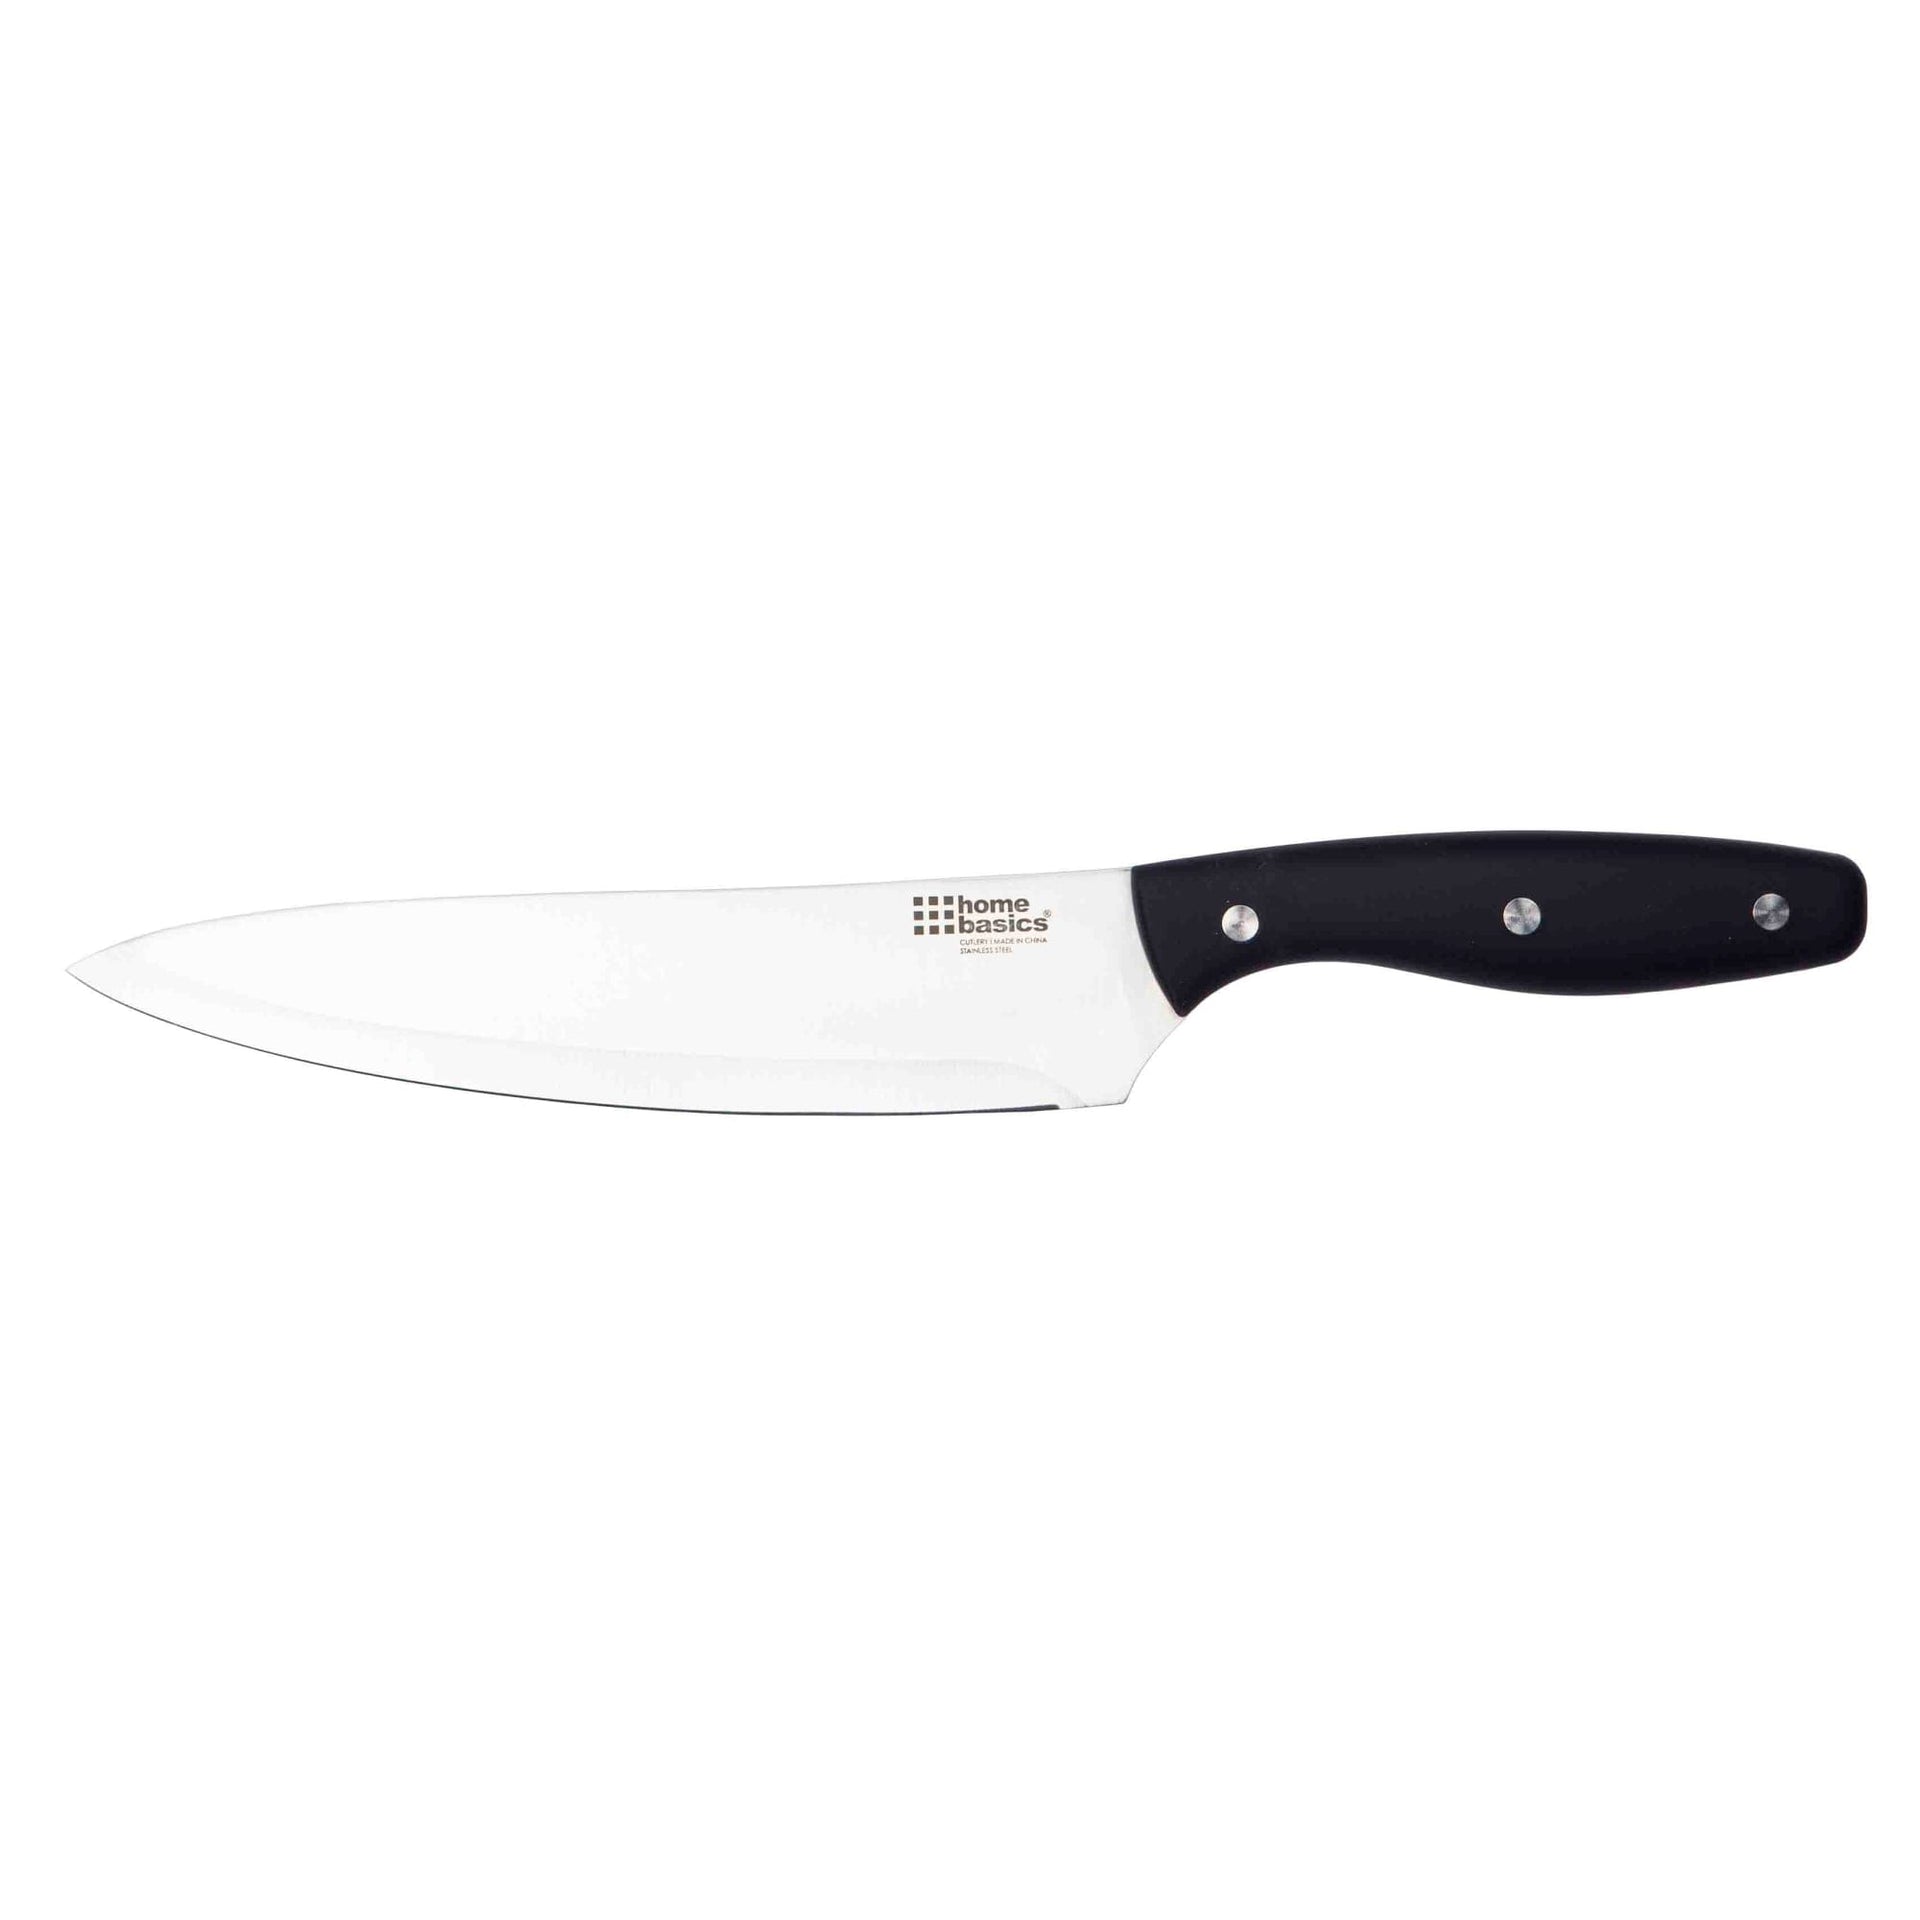 Home Basics 8 Stainless Steel Chef Knife with Contoured Bakelite